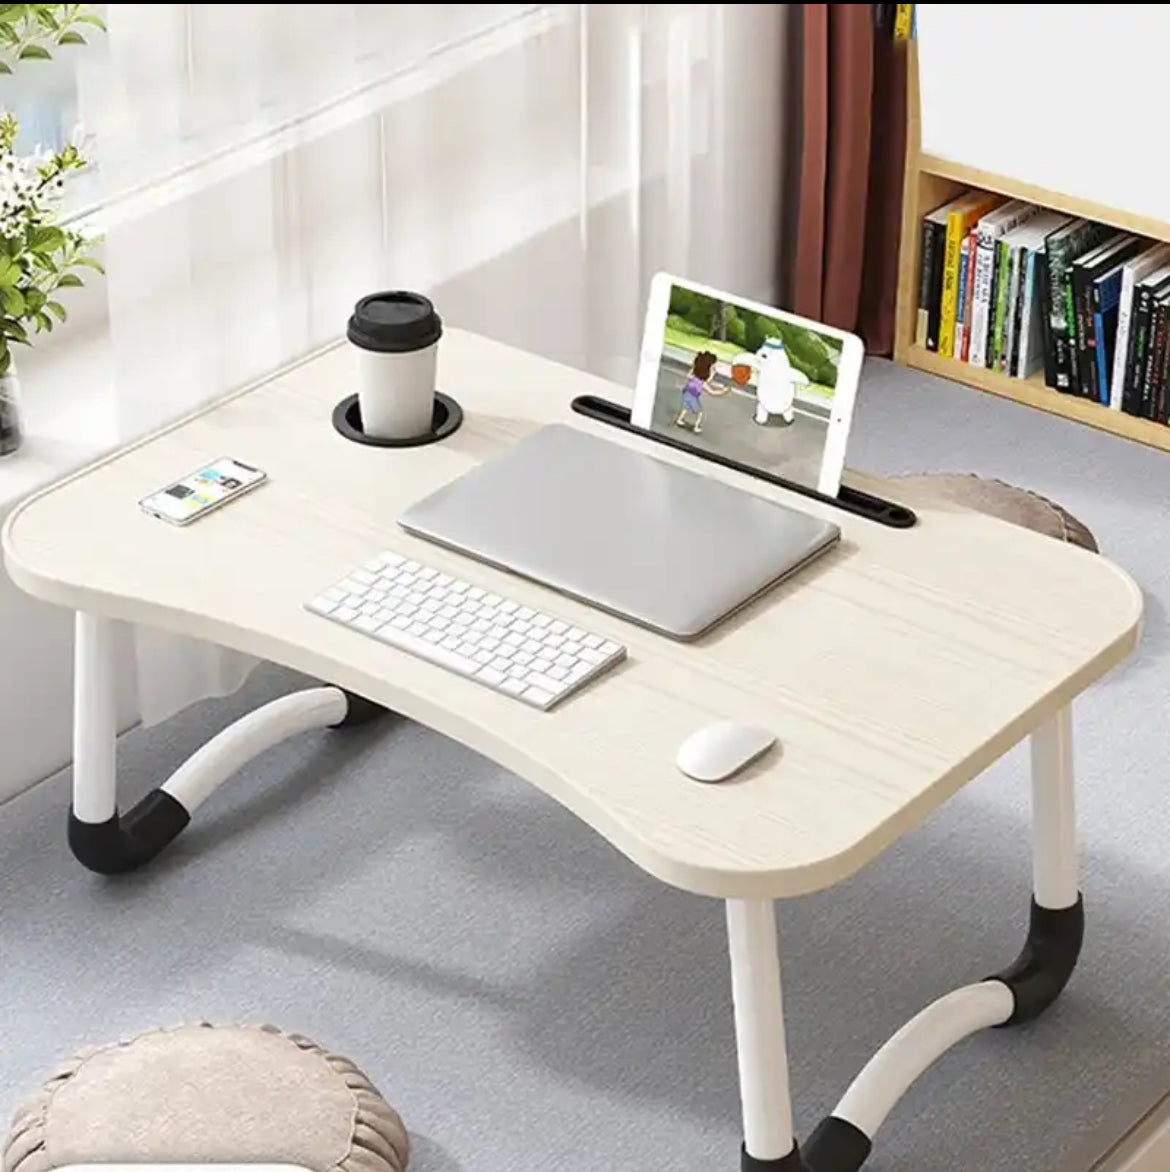 Foldable Computer Desk Card Slot Cup Holder Bed Desk Lazy Person Desk Dormitory Artifact Student Writing And Learning